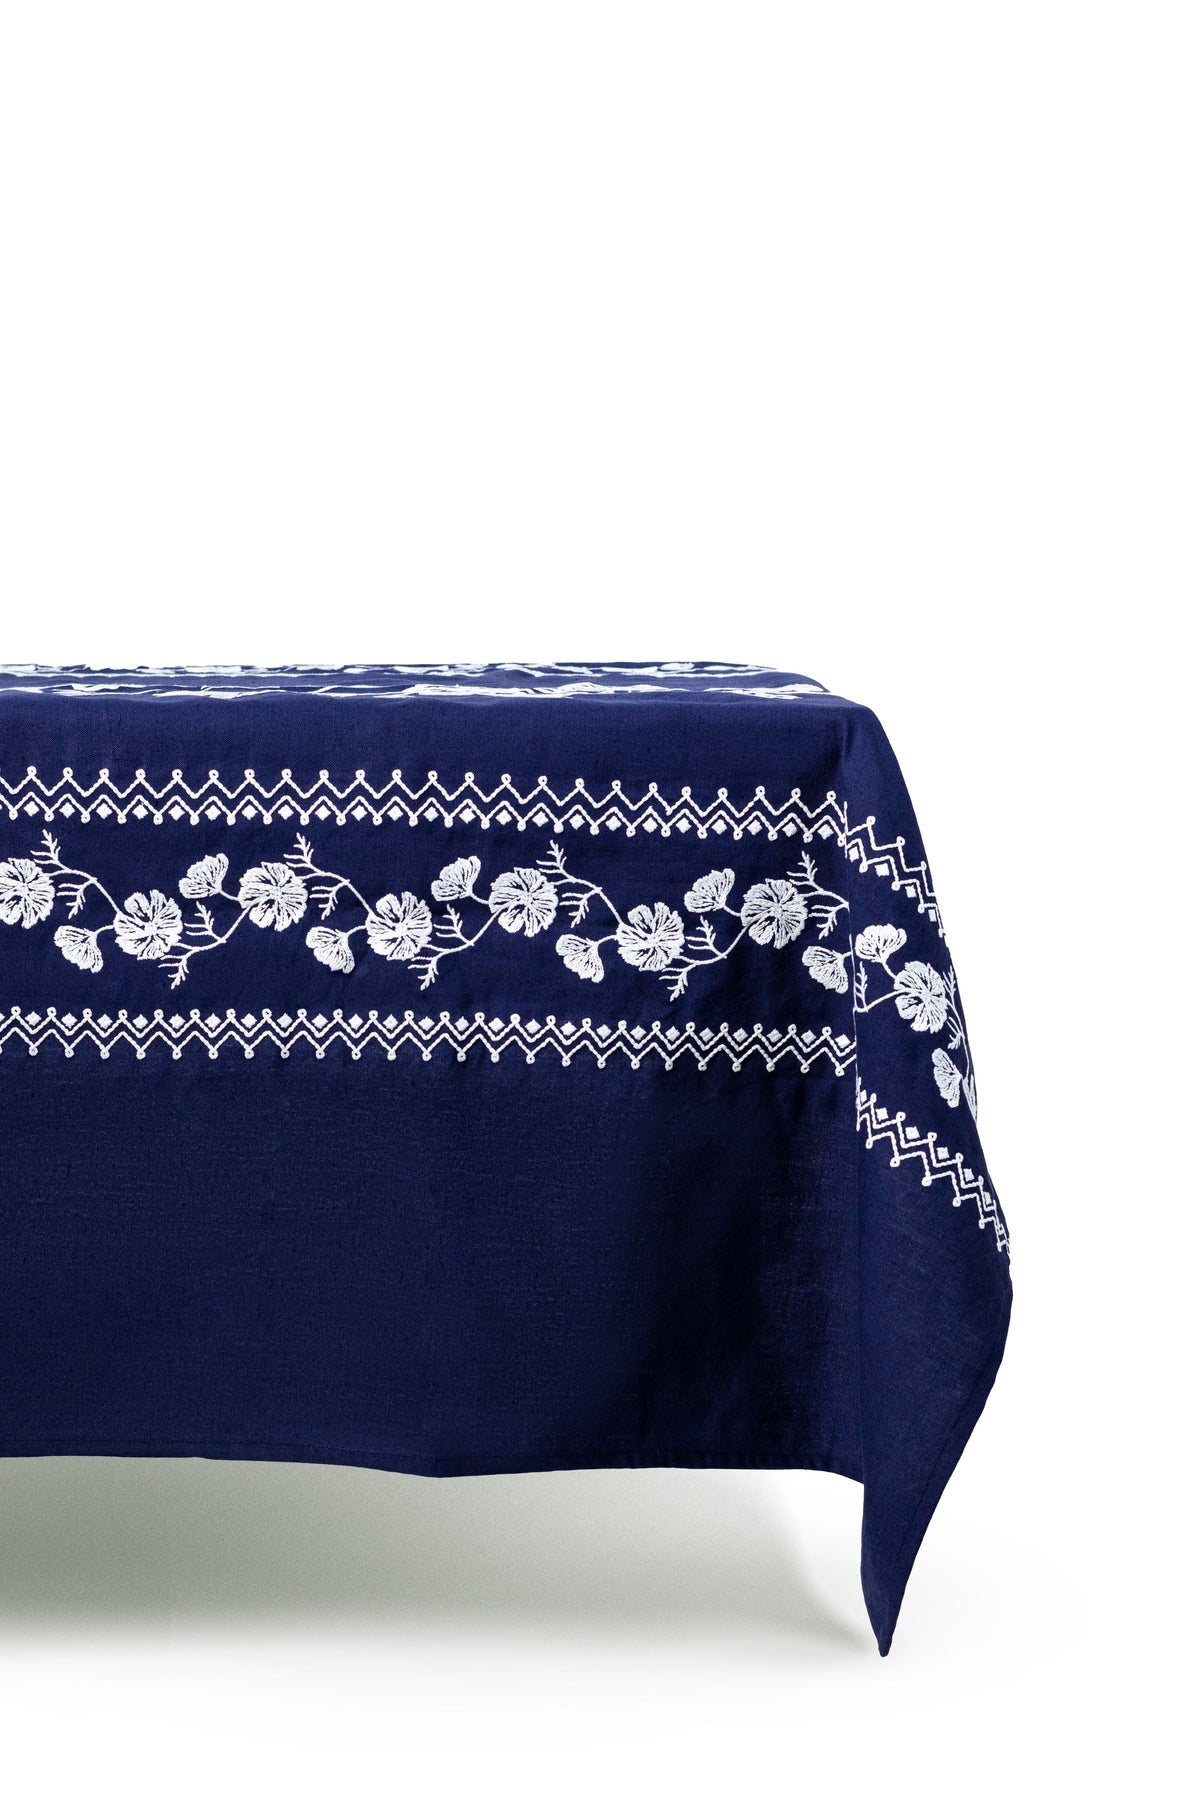 Cosmo Rectangular Tablecloth in Navy